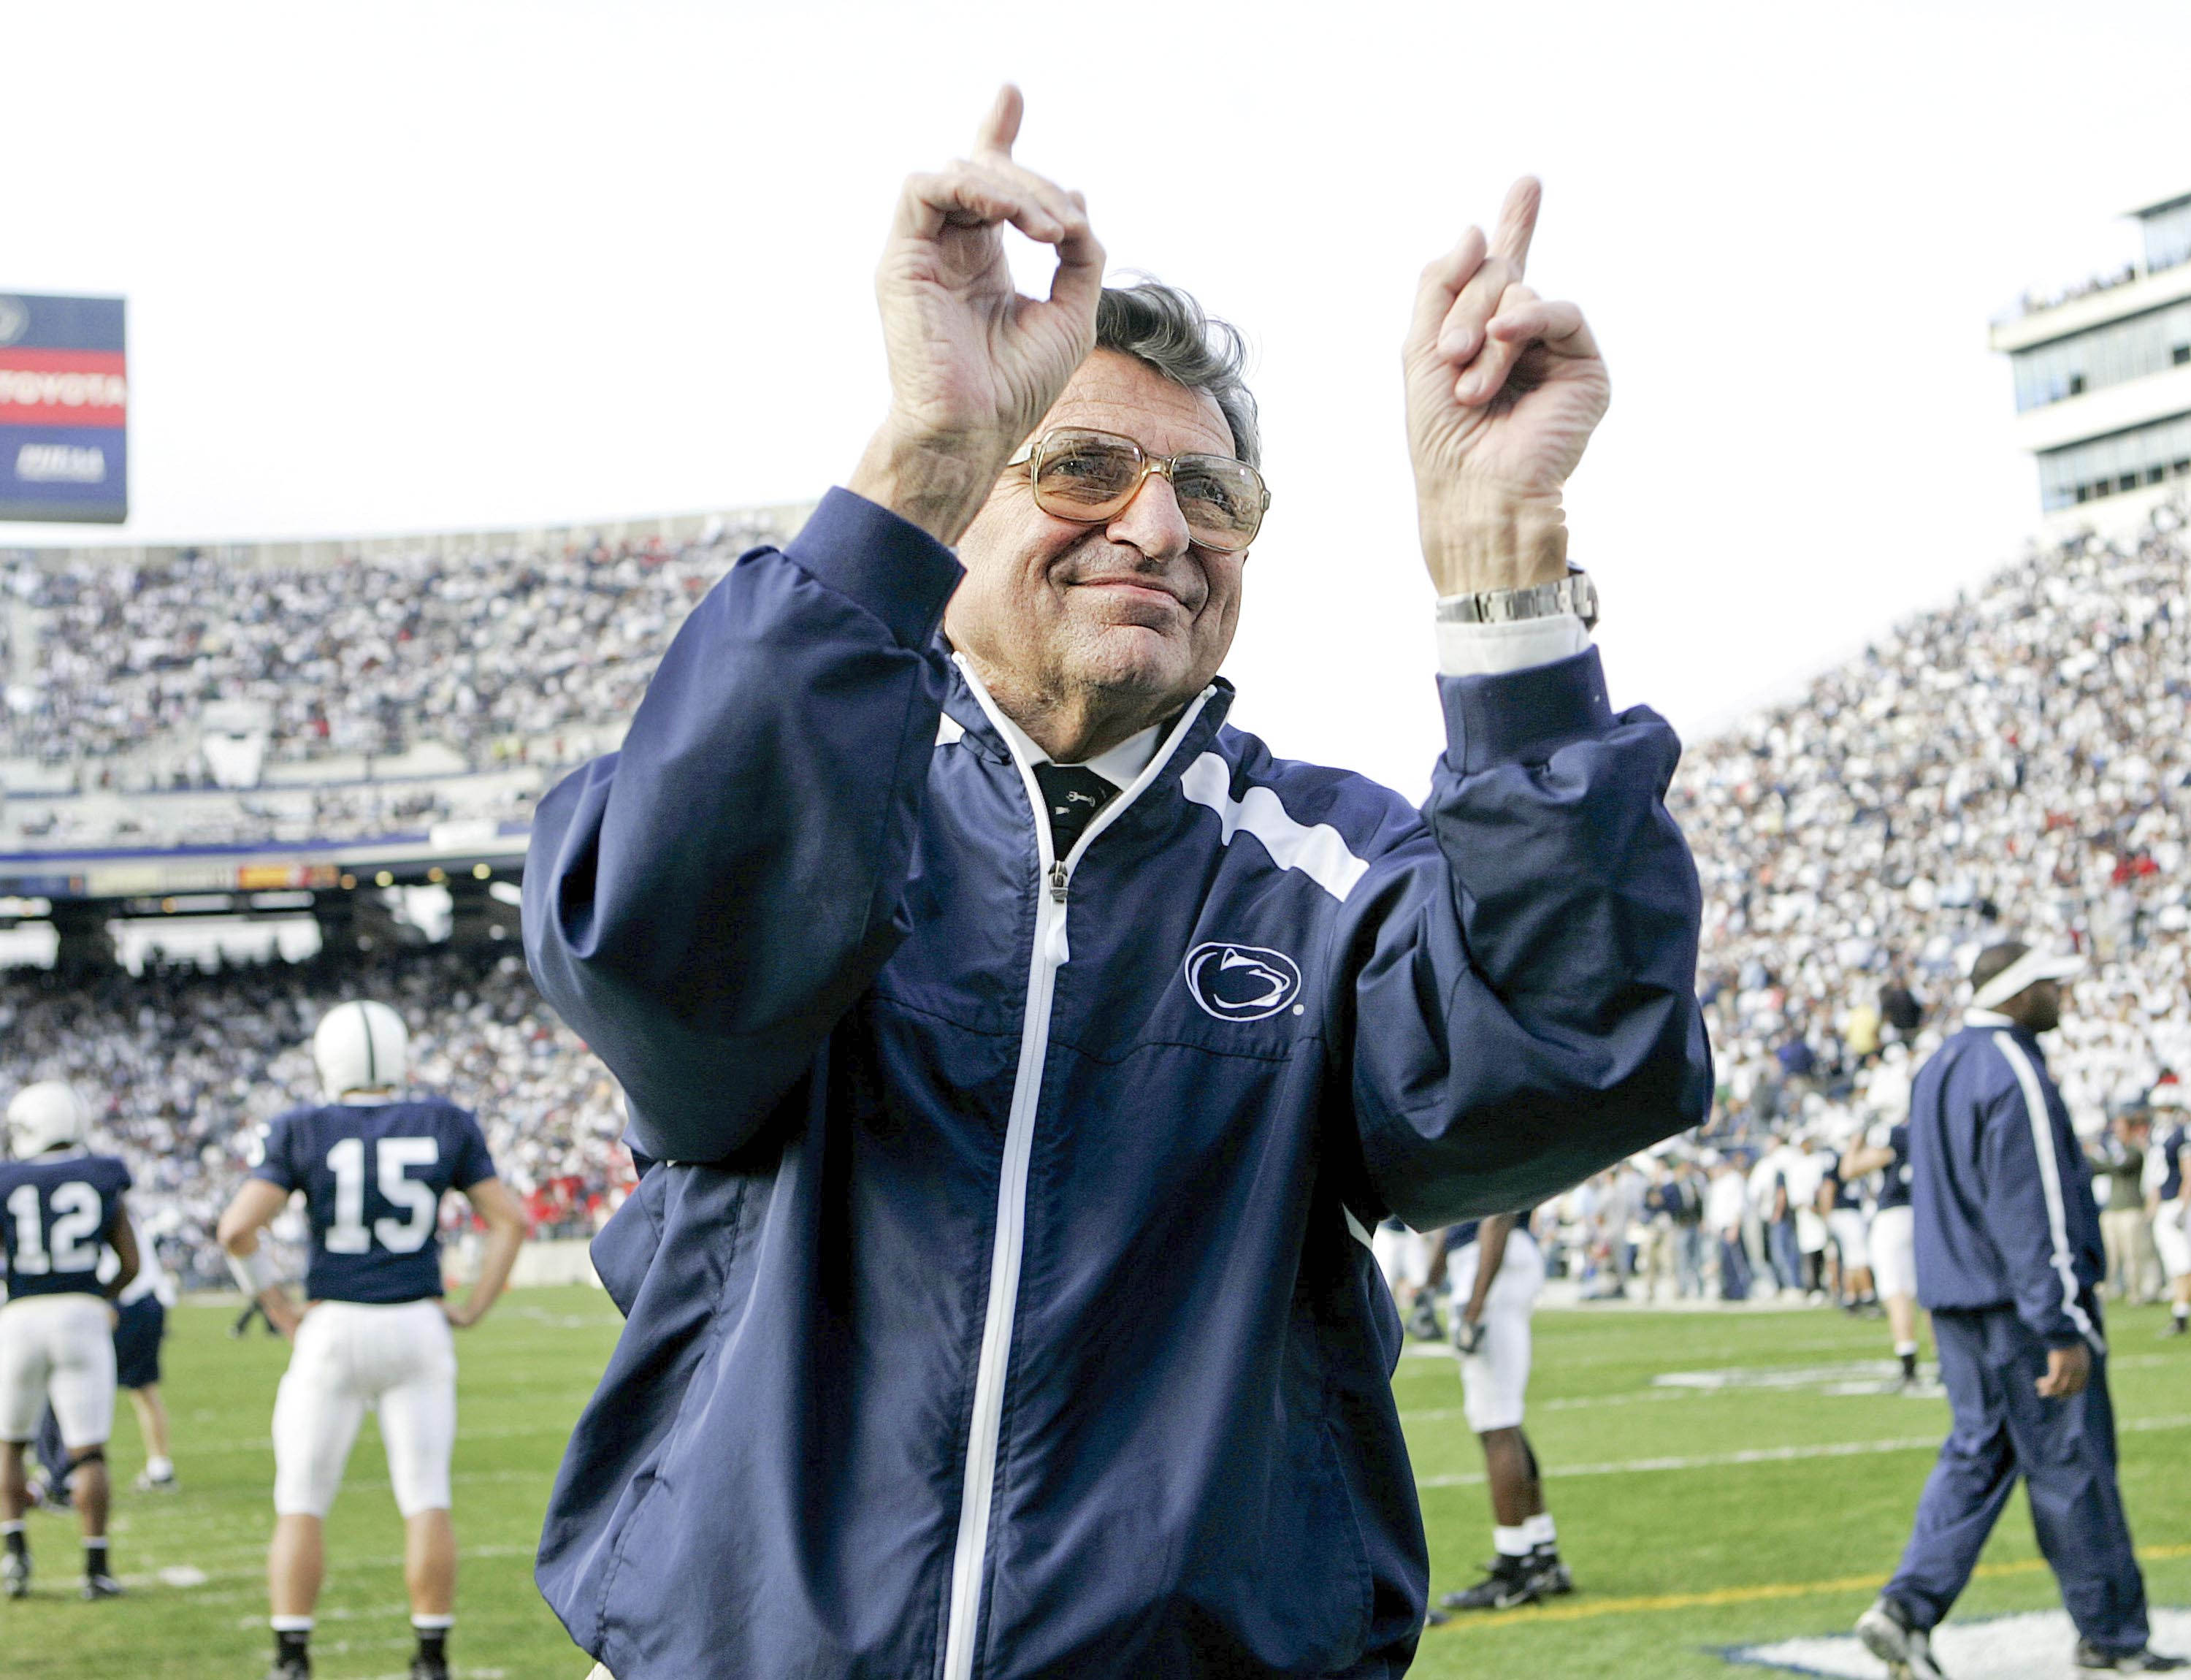 In this file photo from Nov. 5, 2005,  Penn State football coach Joe Paterno acknowledges the crowd during warm-ups before the NCAA college football game against Wisconsin in State College, Pa.  Paterno, the longtime Penn State coach who won more games than anyone else in major college football but was fired amid a child sex abuse scandal that scarred his reputation for winning with integrity, died Sunday, Jan. 22, 2012. He was 85.  (AP Photo/Carolyn Kaster, File)